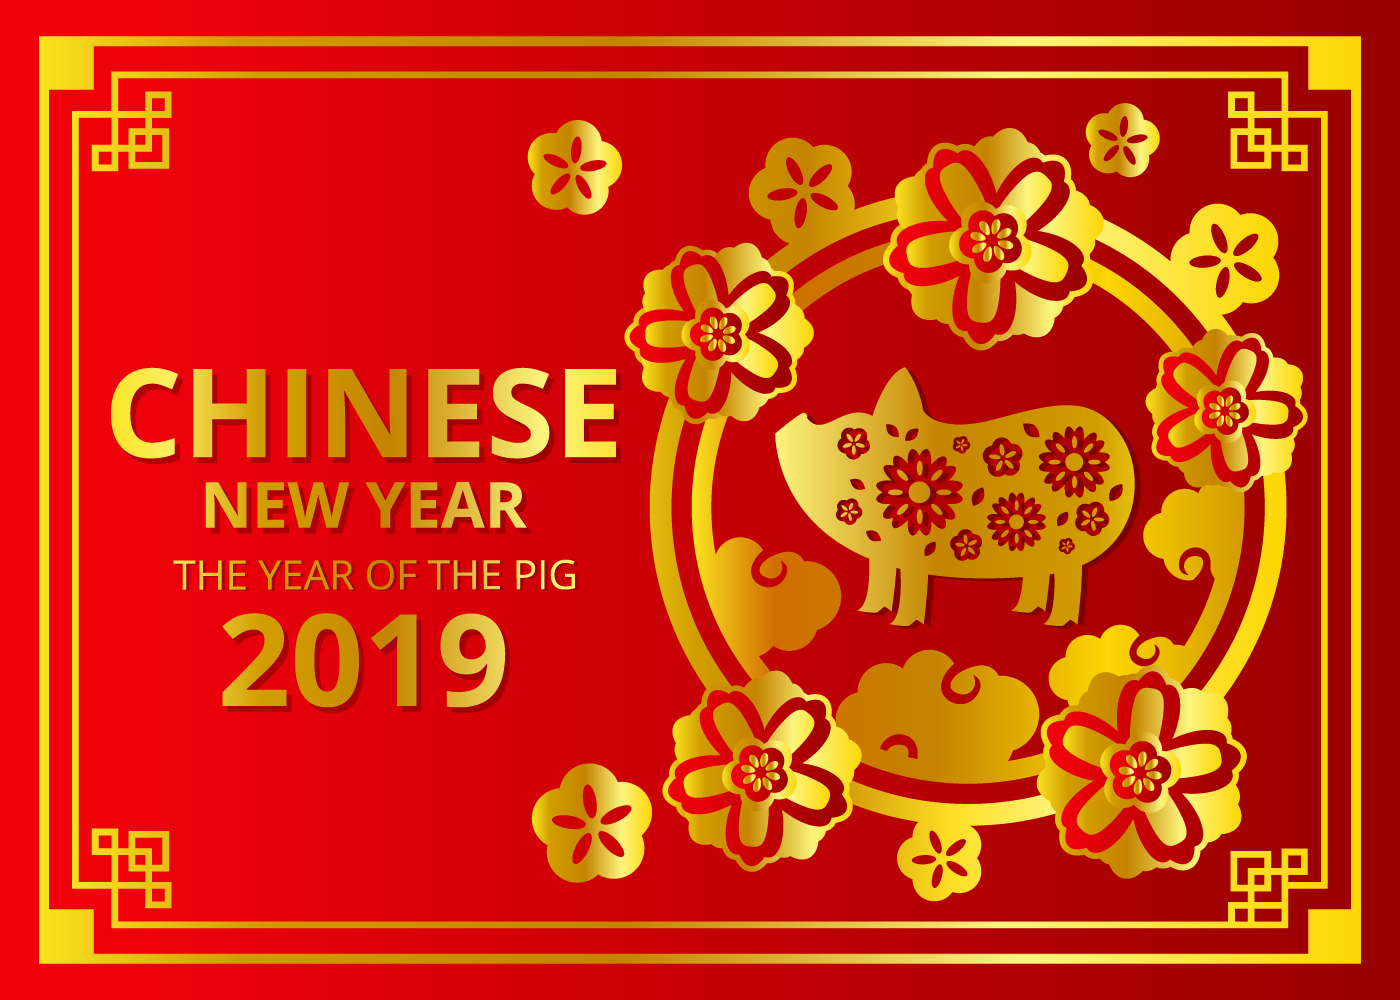 2019 Chinese New Year Vector - Download Free Vectors, Clipart Graphics & Vector Art